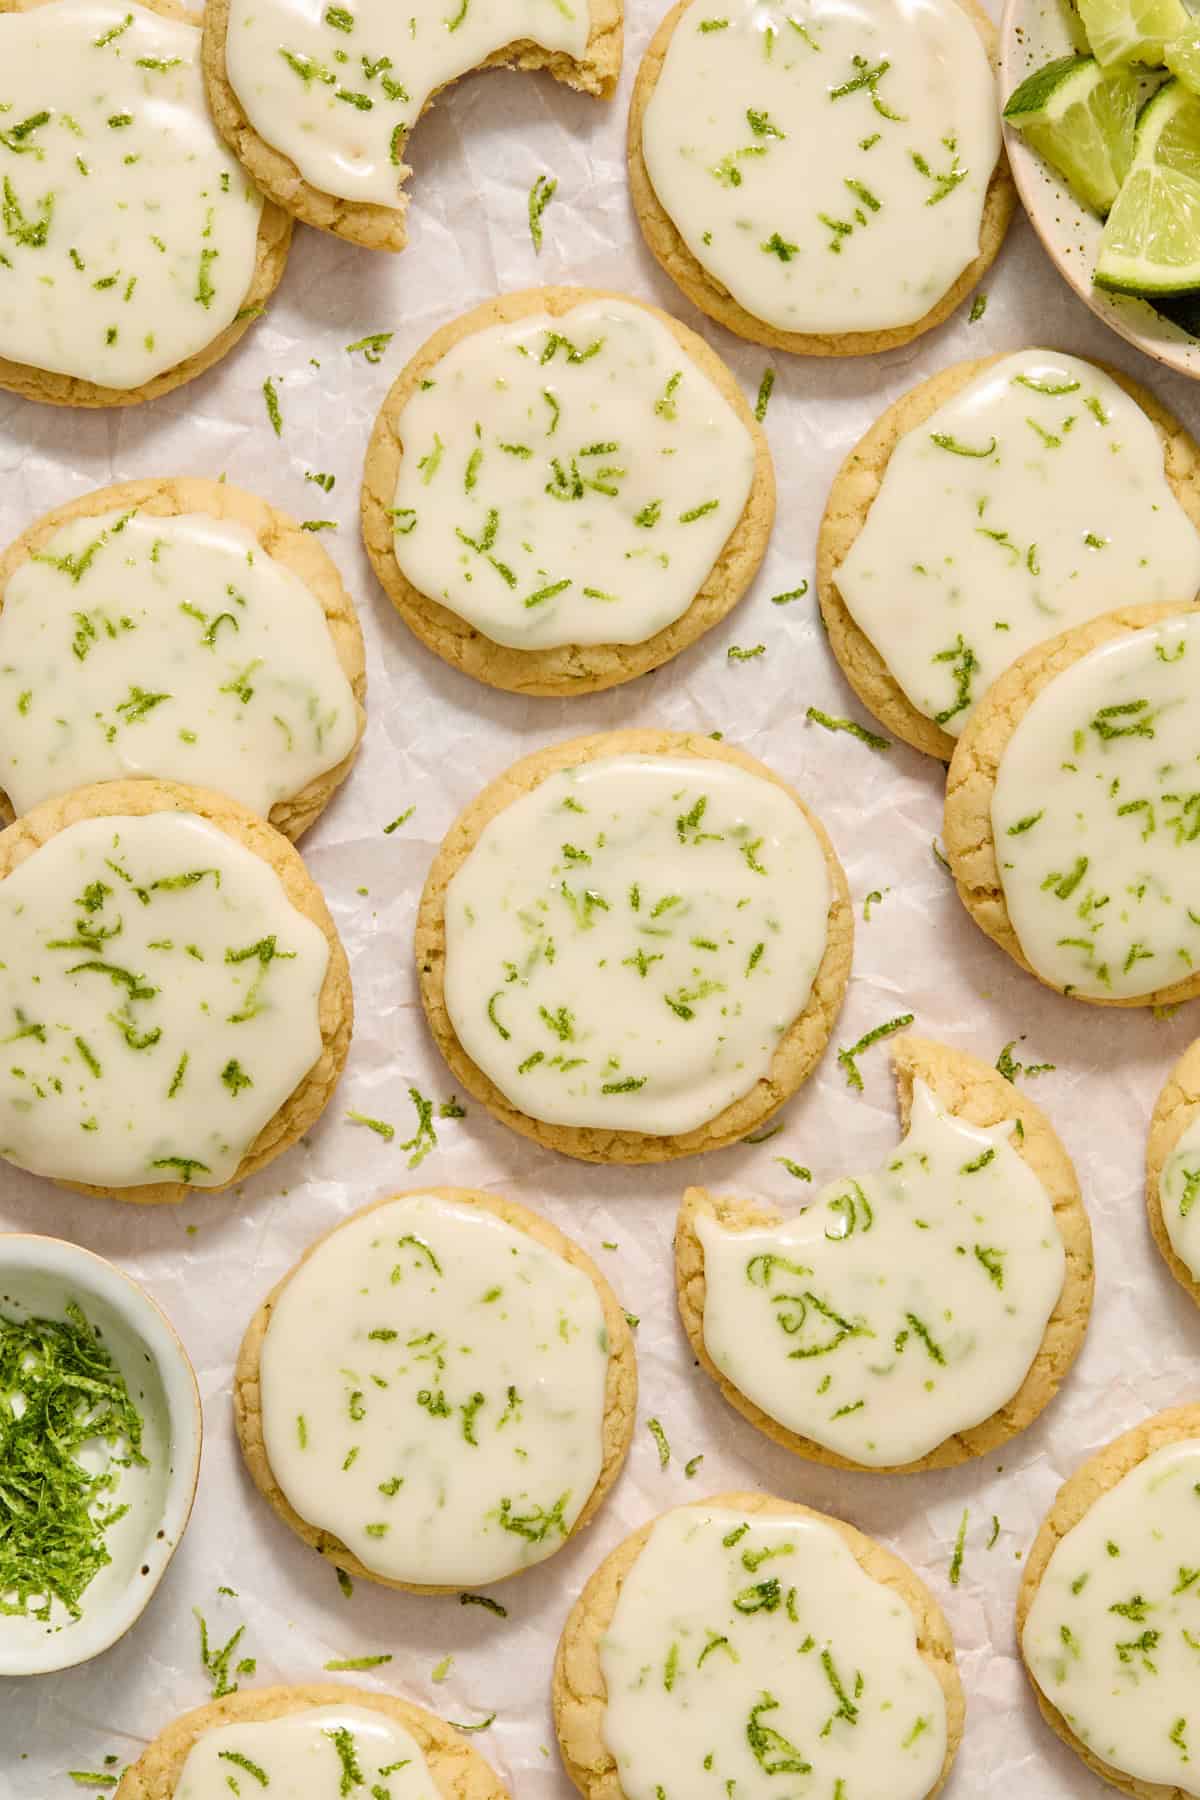 Key lime cookie with lime glaze on counter with other cookies and limes surrounding.